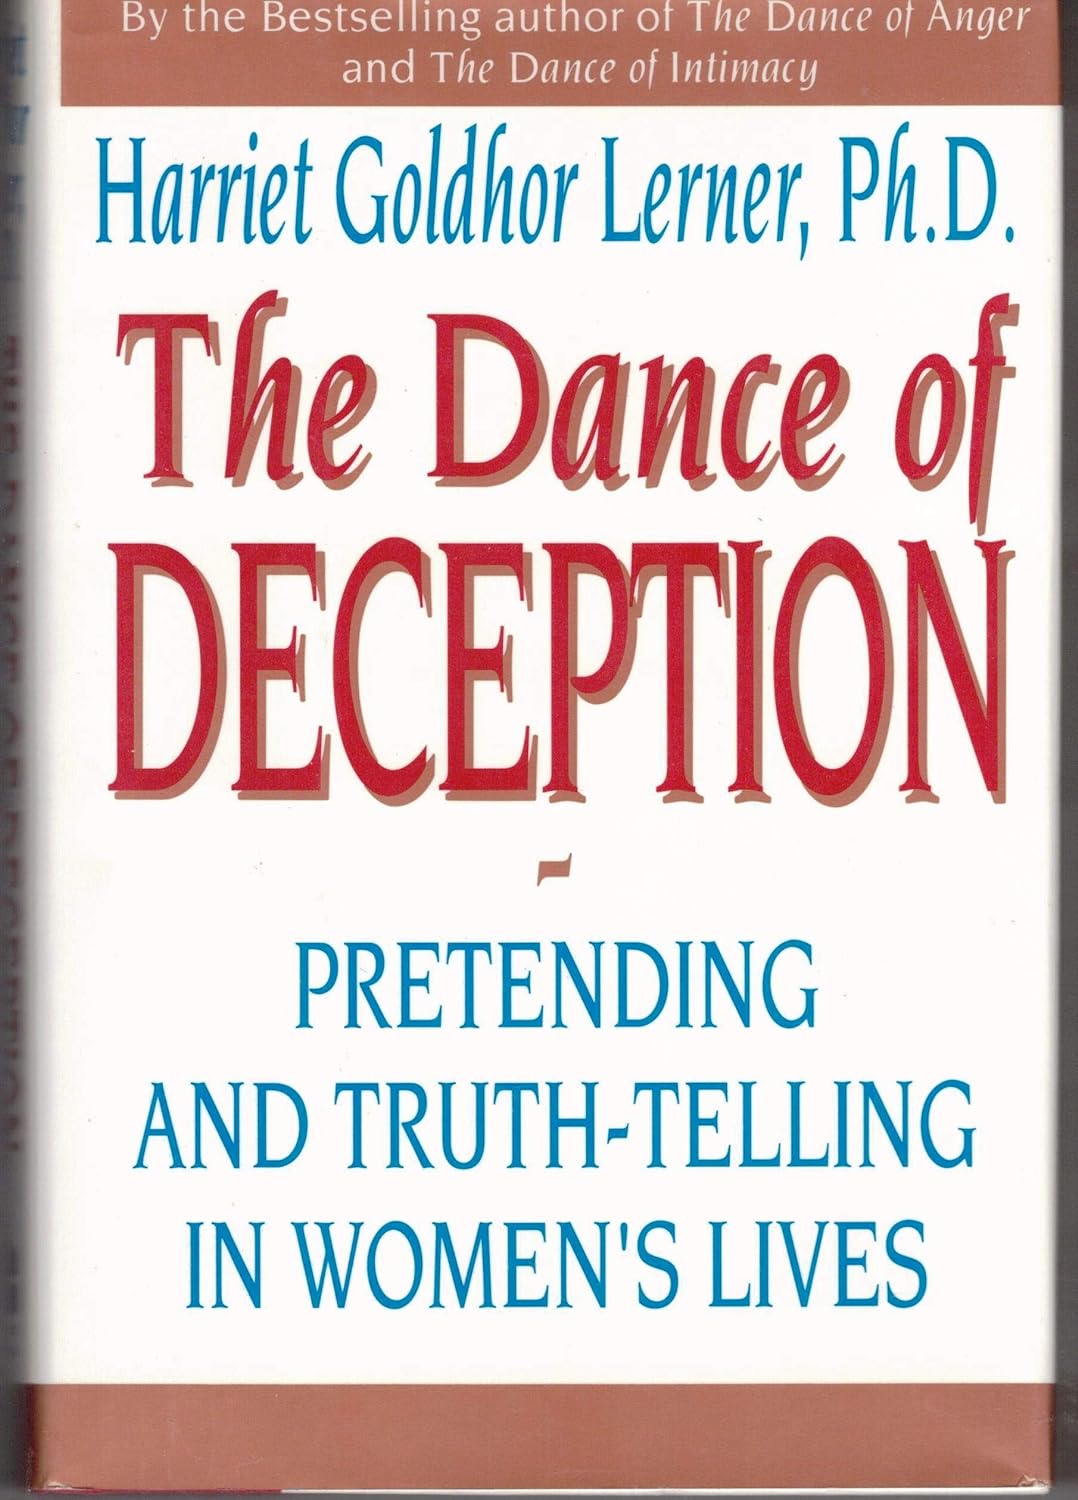 Book Cover - The Dance of Deception by Harriet Goldhor Lerner